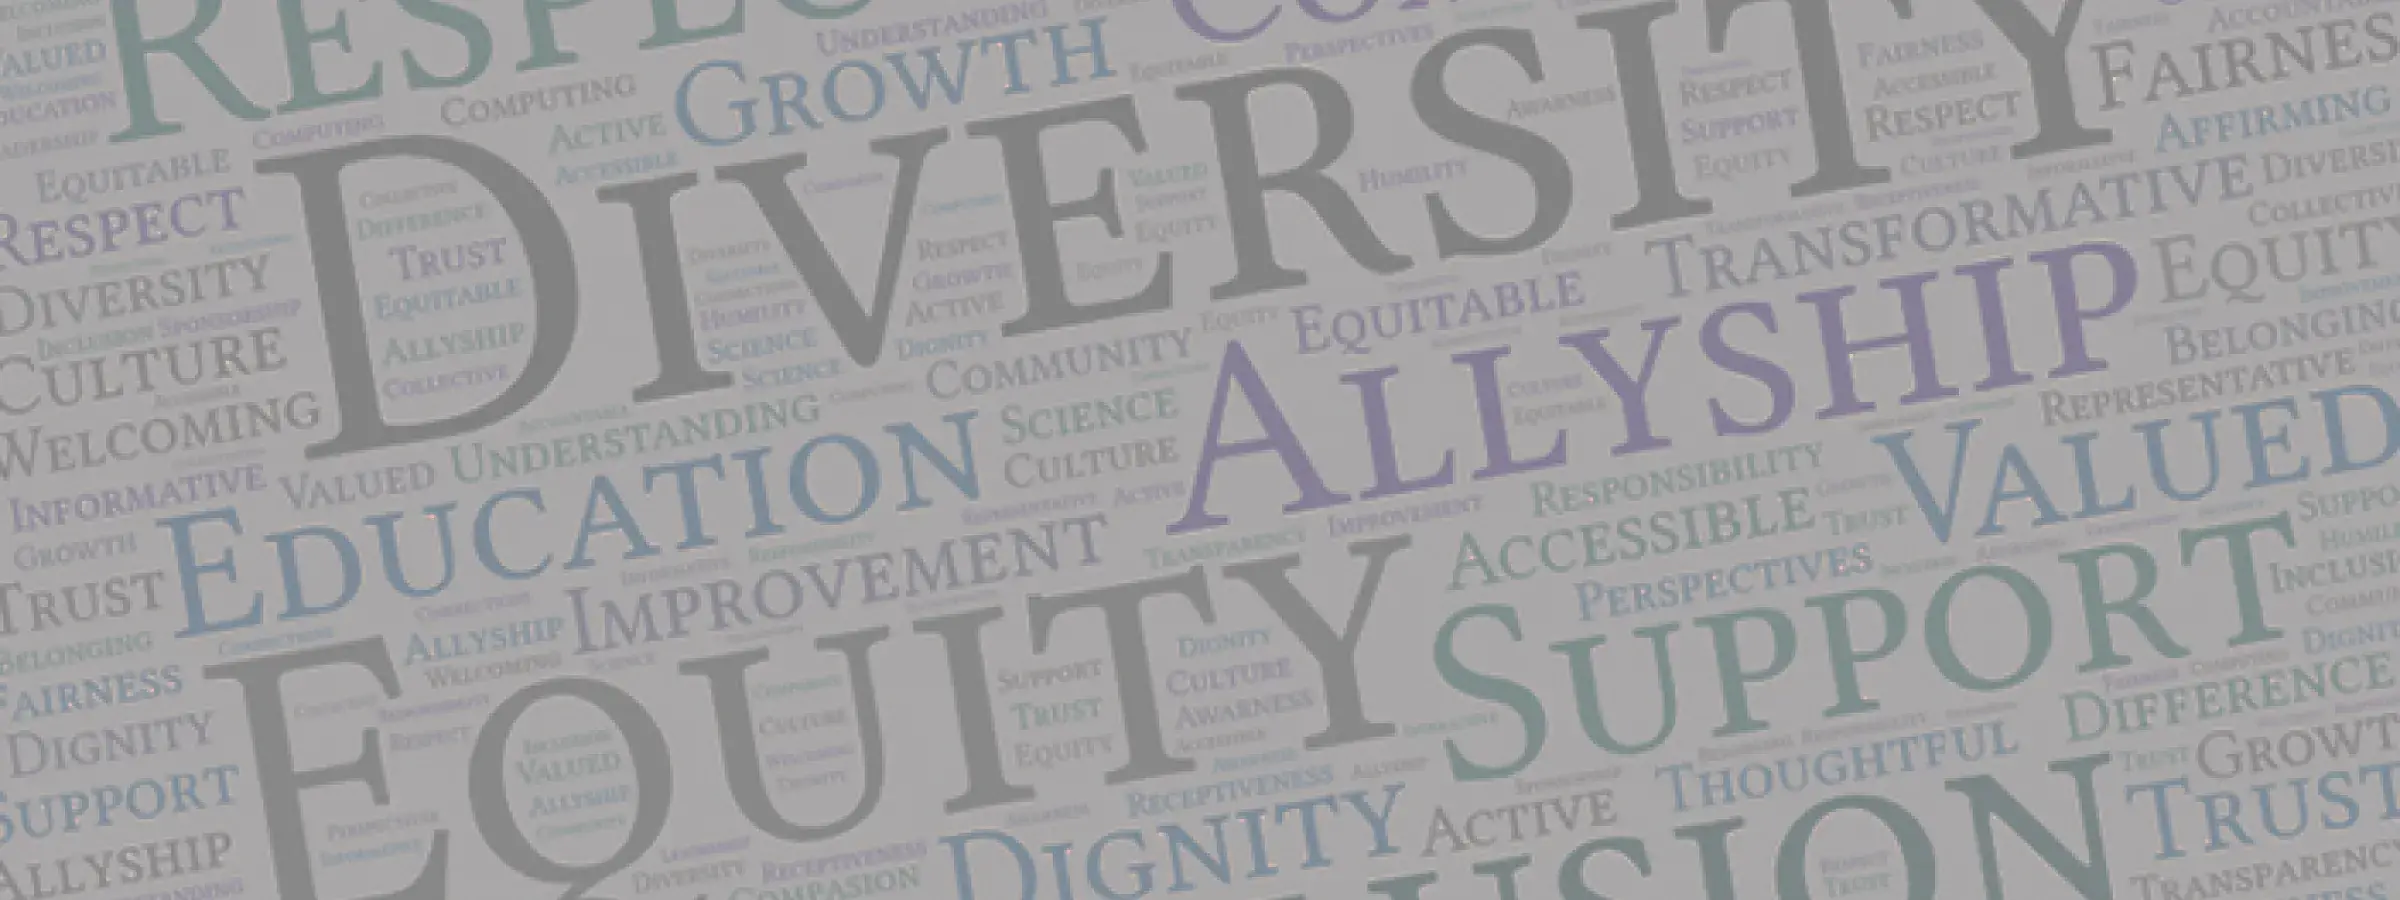 Diversity, equity and inclusion word-cloud graphic for page header